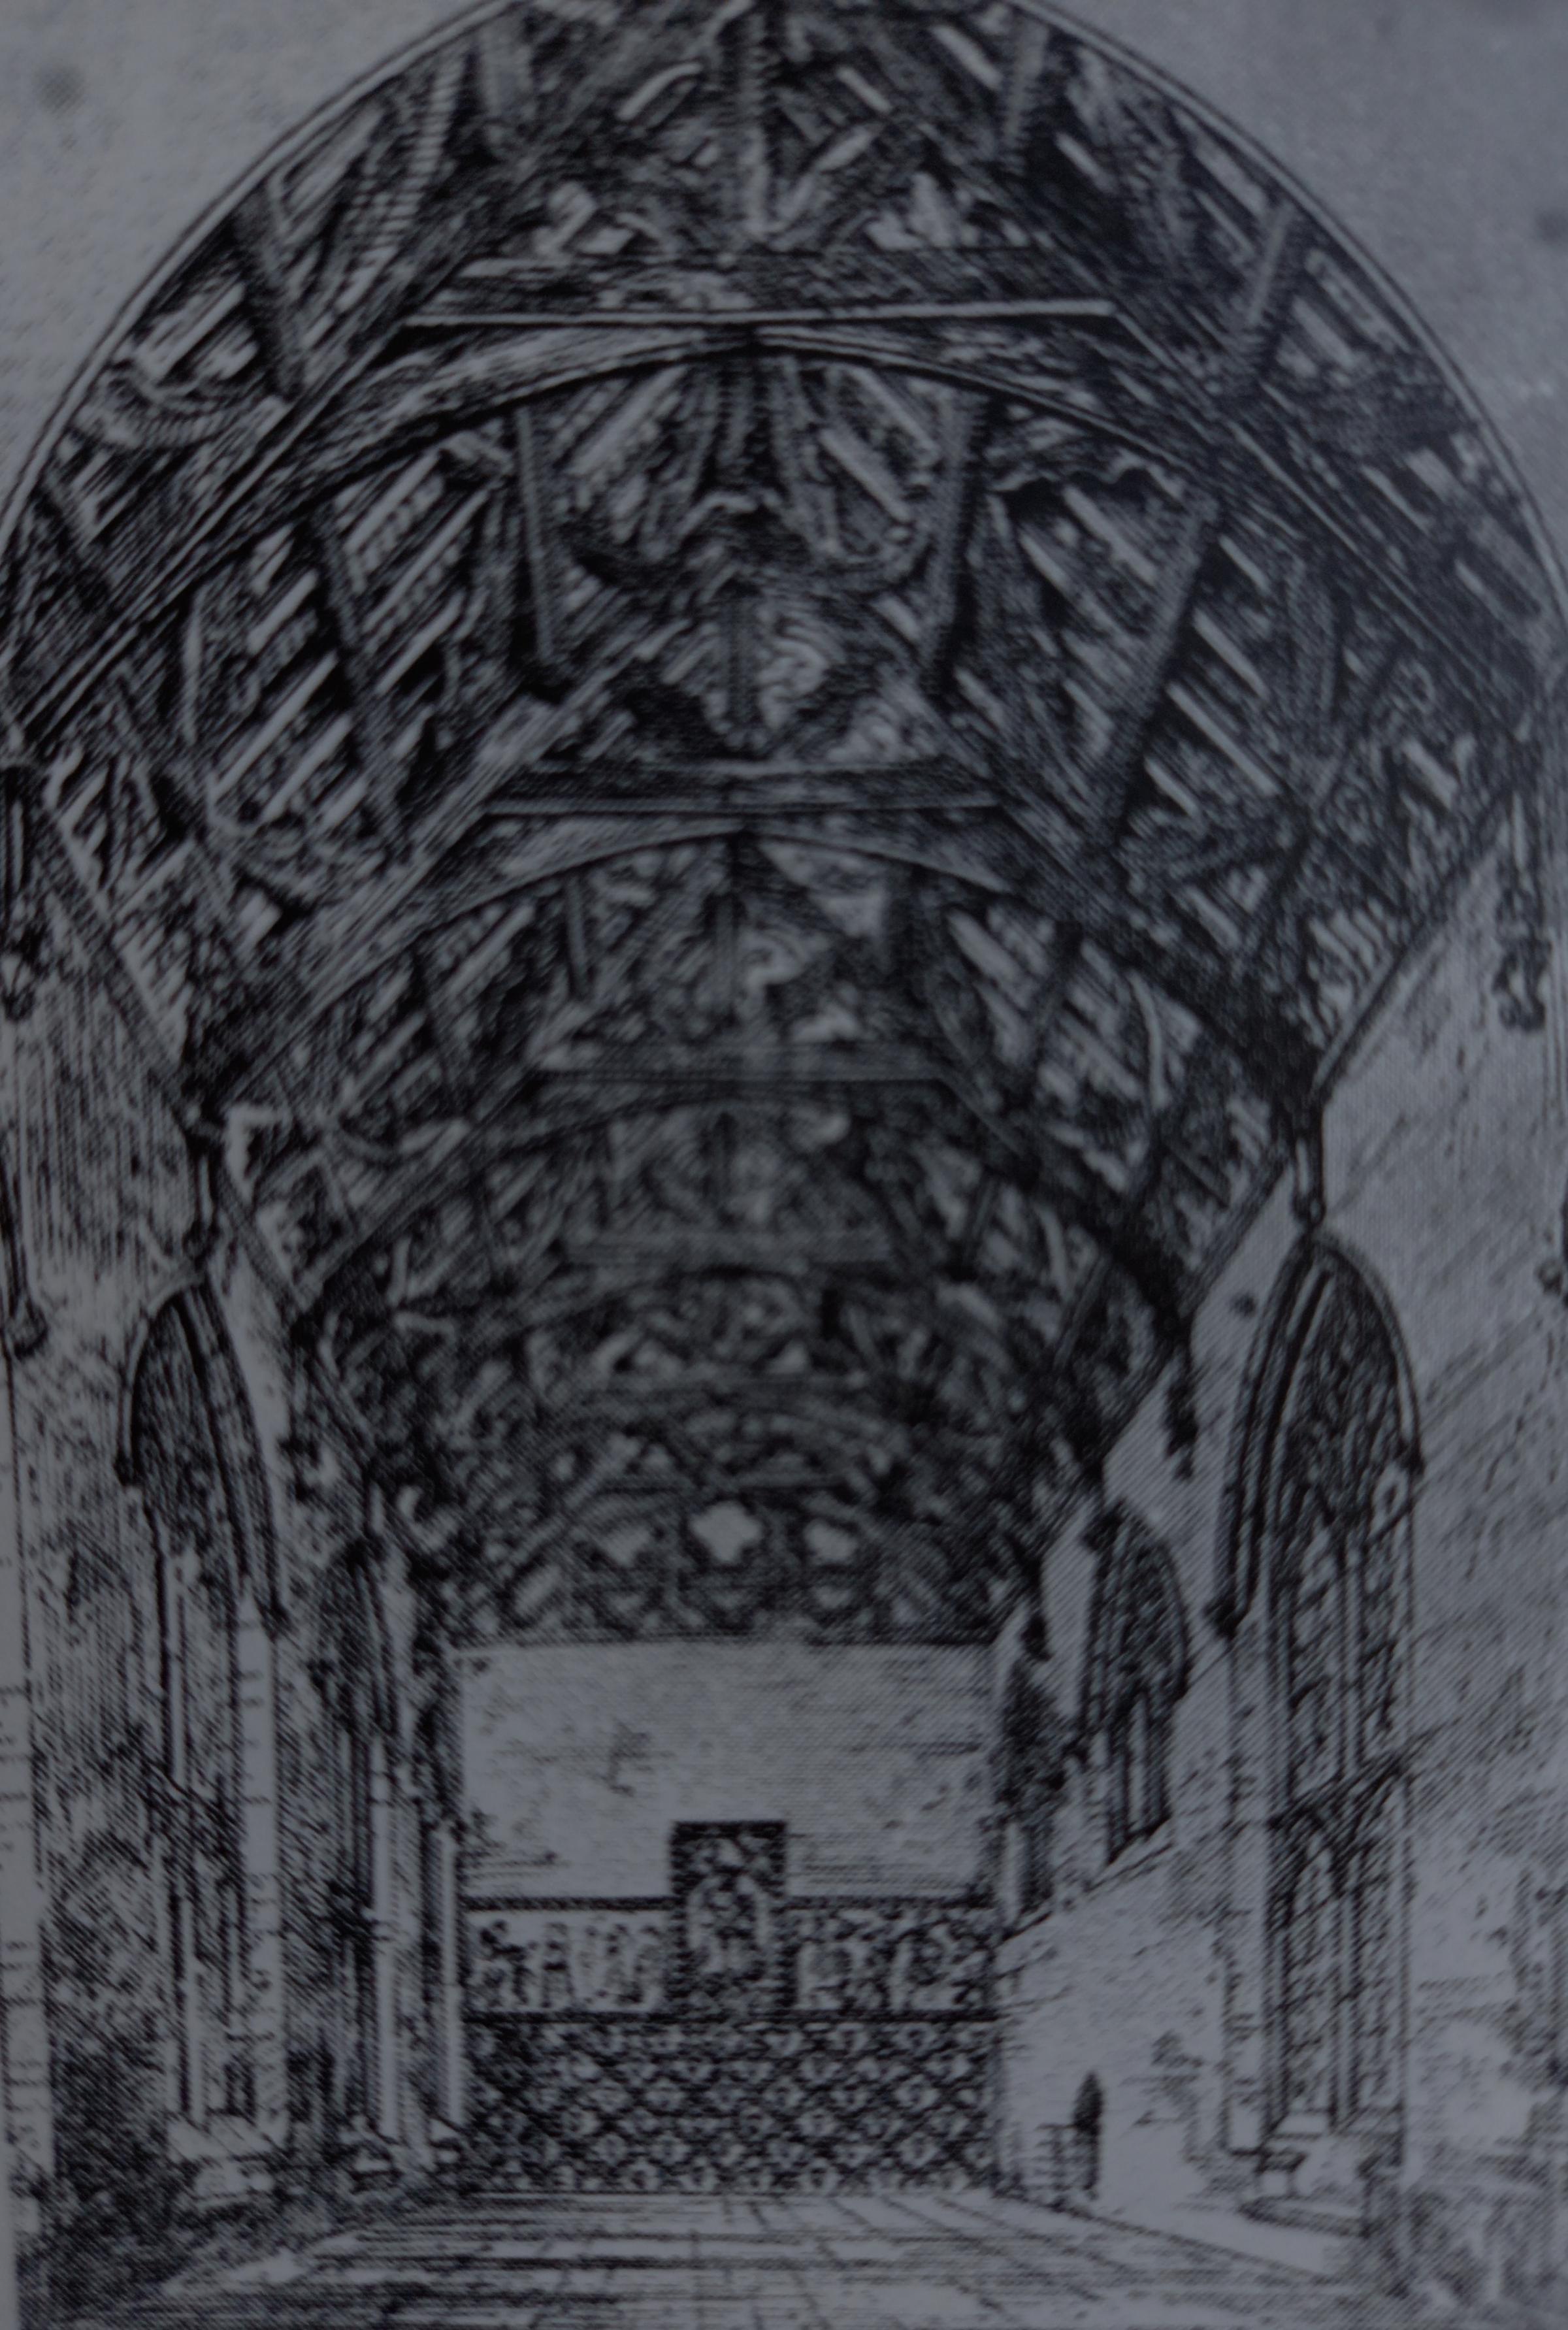 A drawing of the inside of Worcester Cathedral’s Guesten Hall by EG Street in 1859